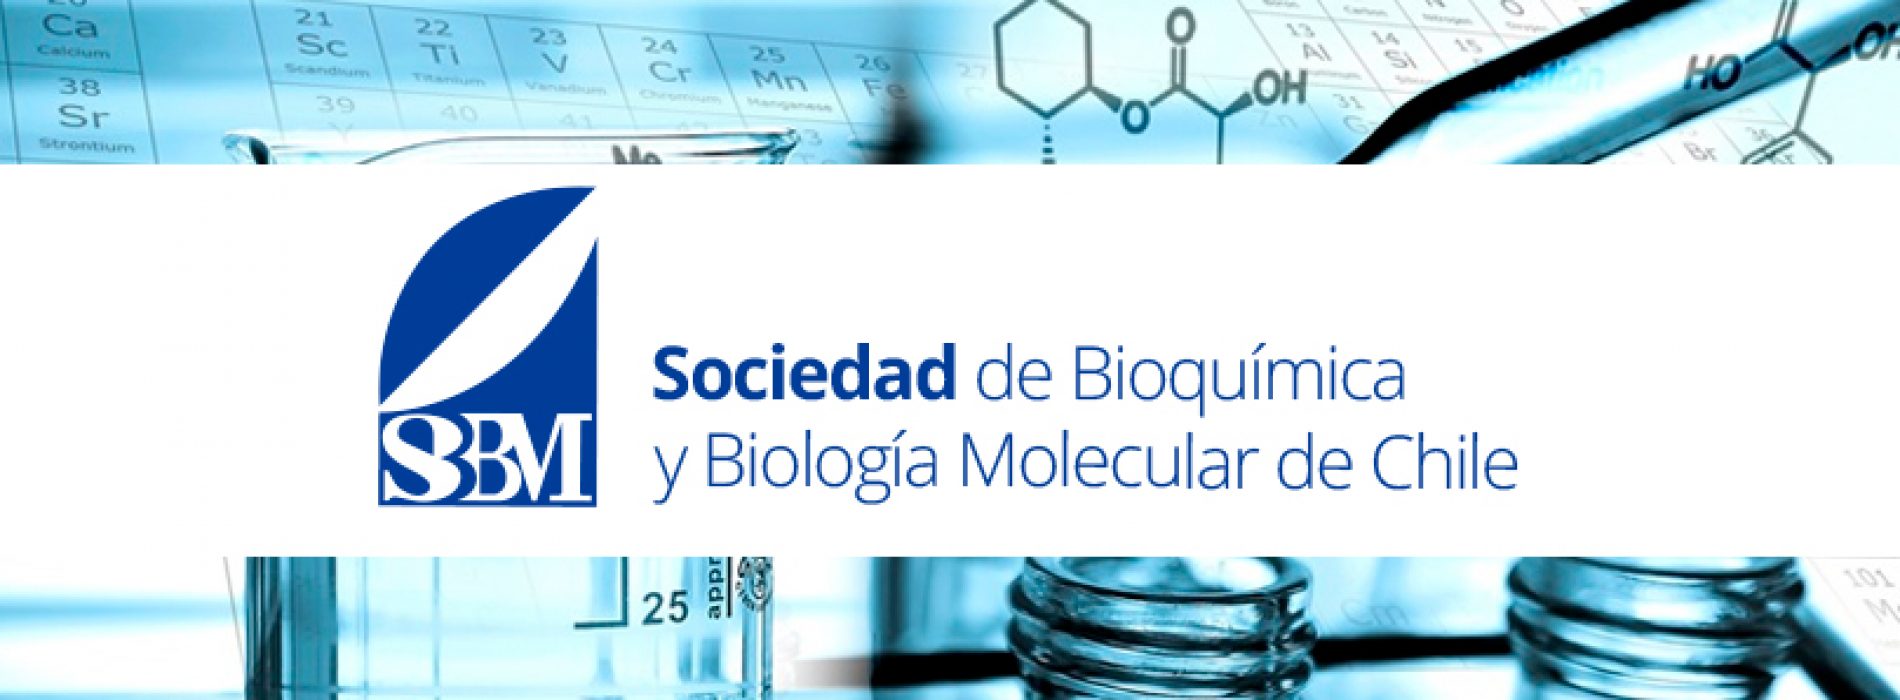 The society for Biochemistry and Molecular Biology welcomes new additions